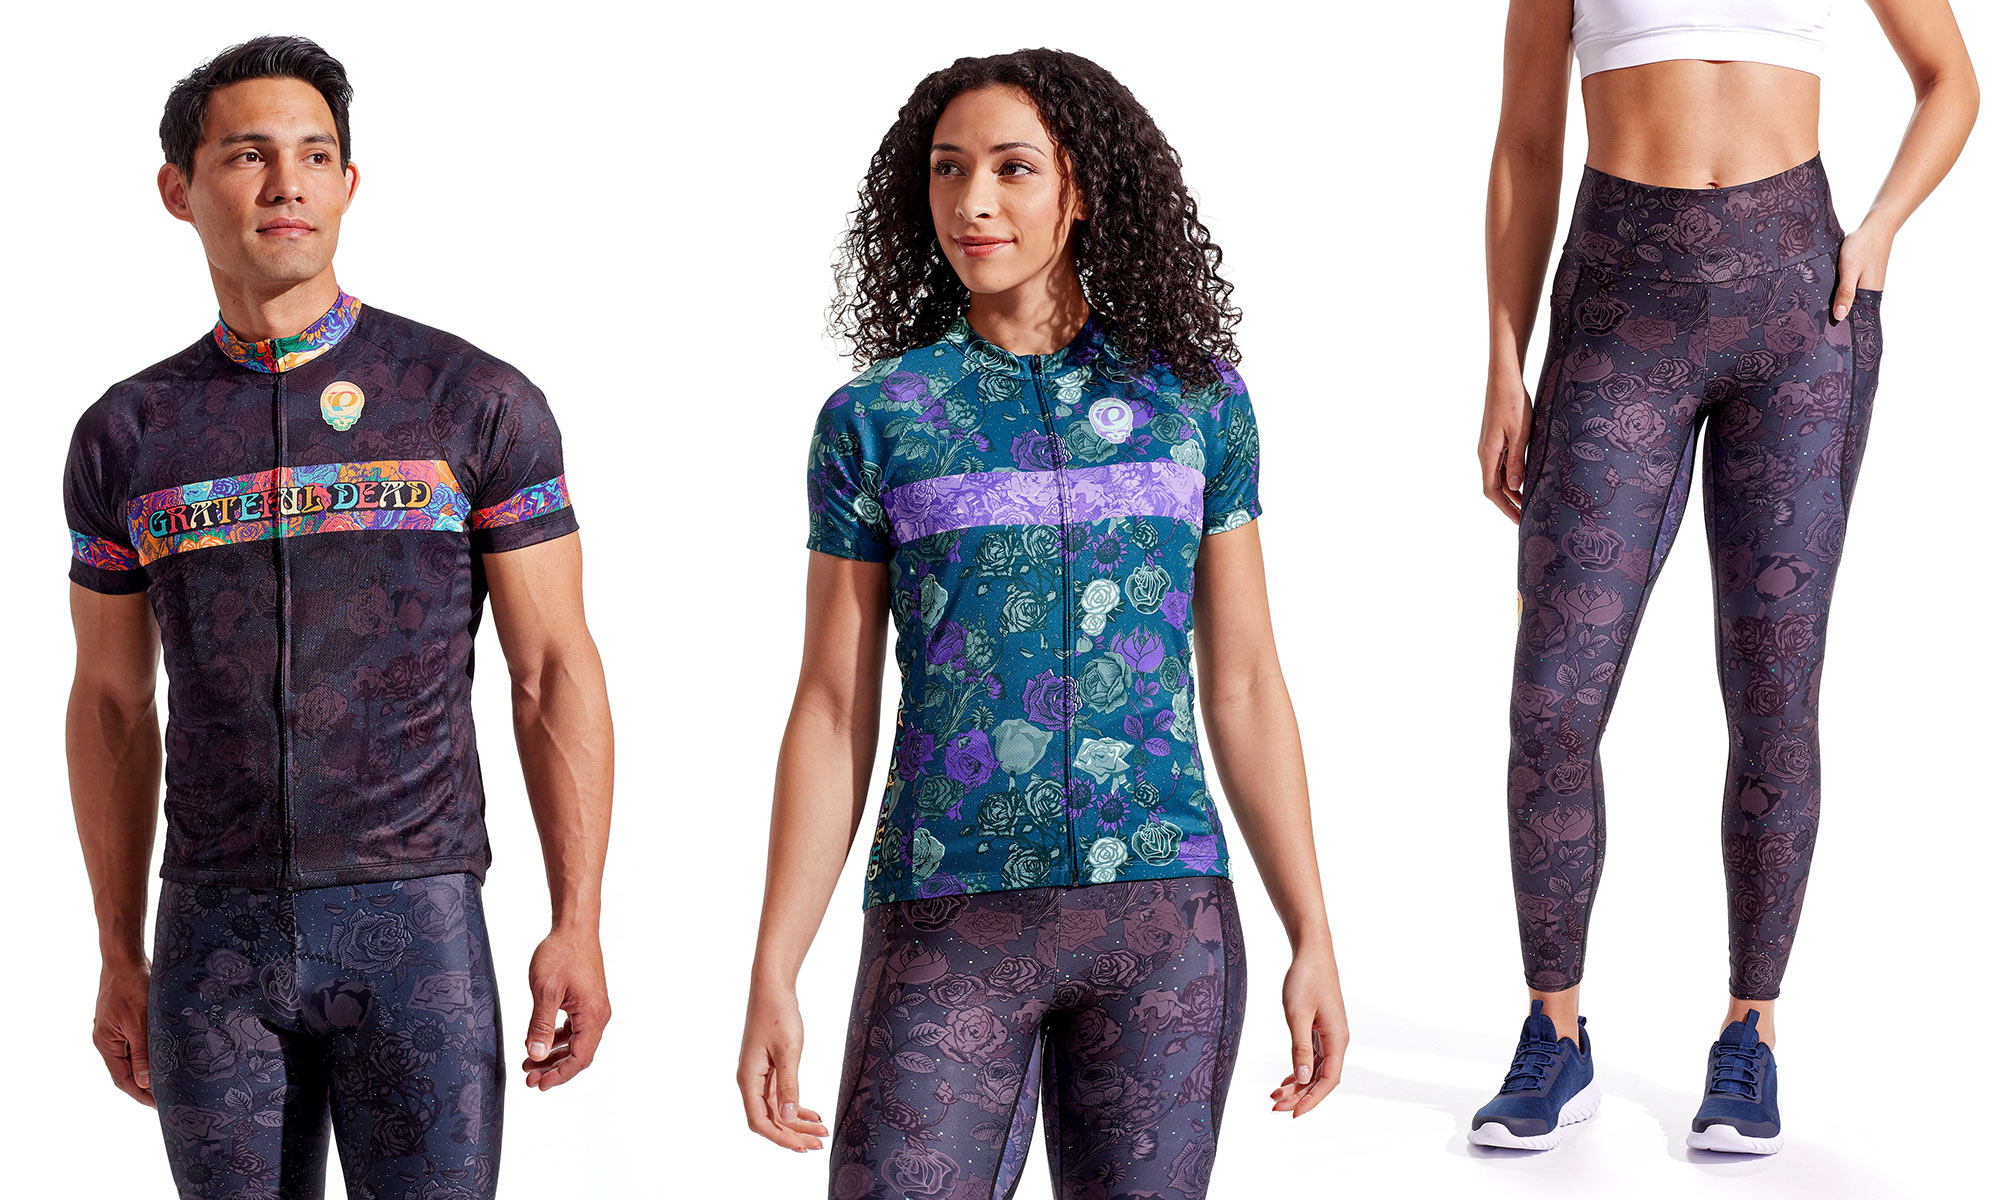 Pearl Izumi Grateful Dead limited edition Rambler collection, retro 1972 Europe Summer Tour inspired cycling kit, classic jerseys & tights